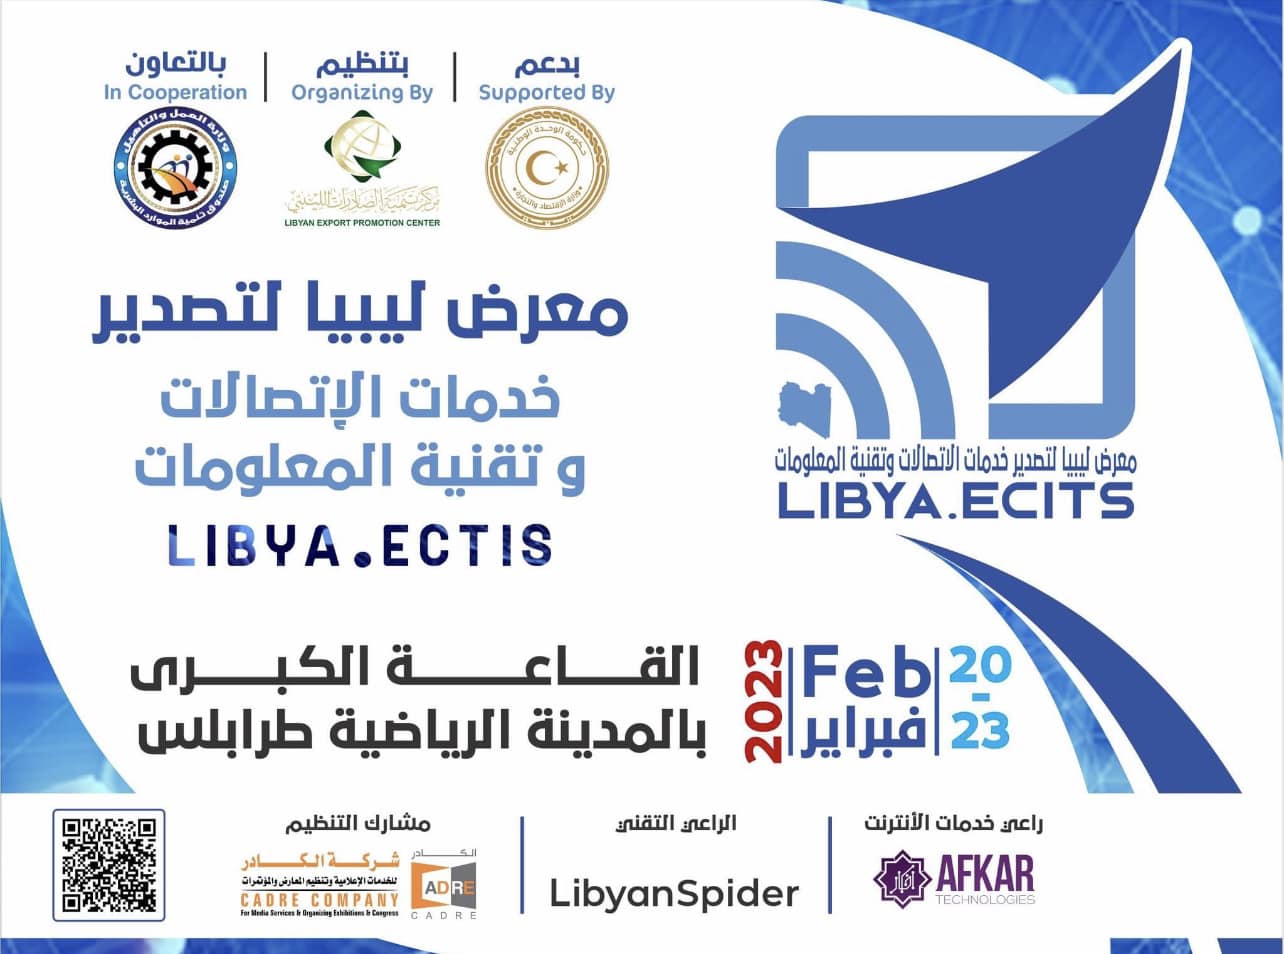 Libya aims to consolidate and leverage its ICT services for export